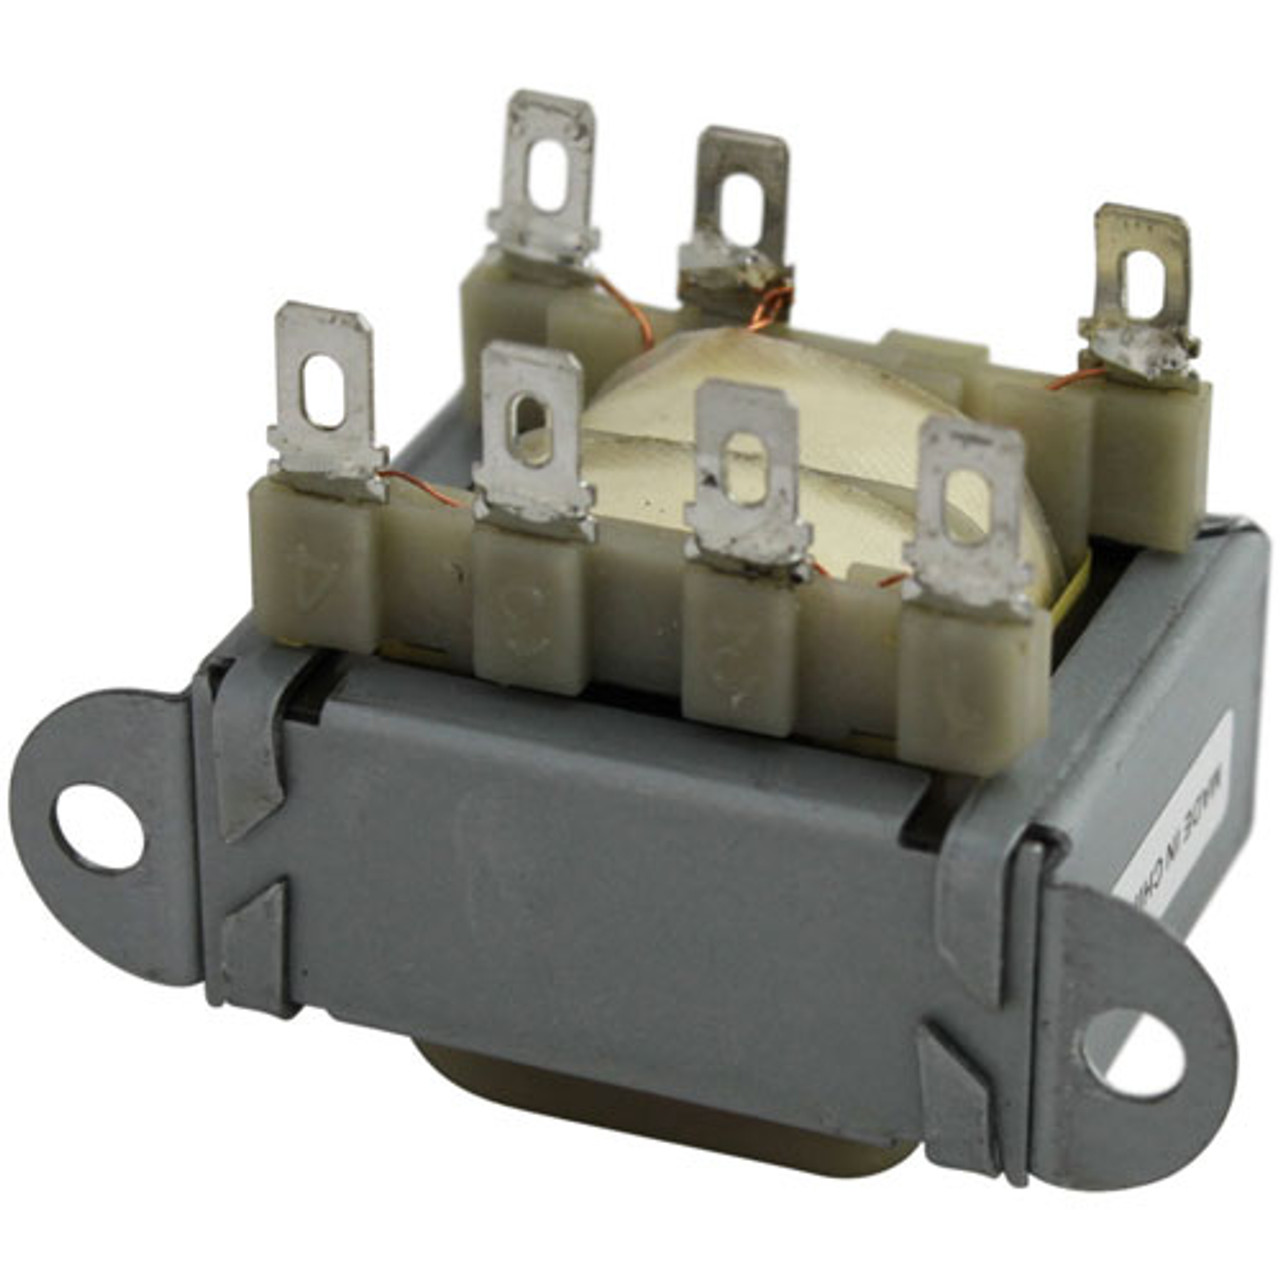 Transformer - 115/230 To 12V - Replacement Part For Cres Cor 0769 159